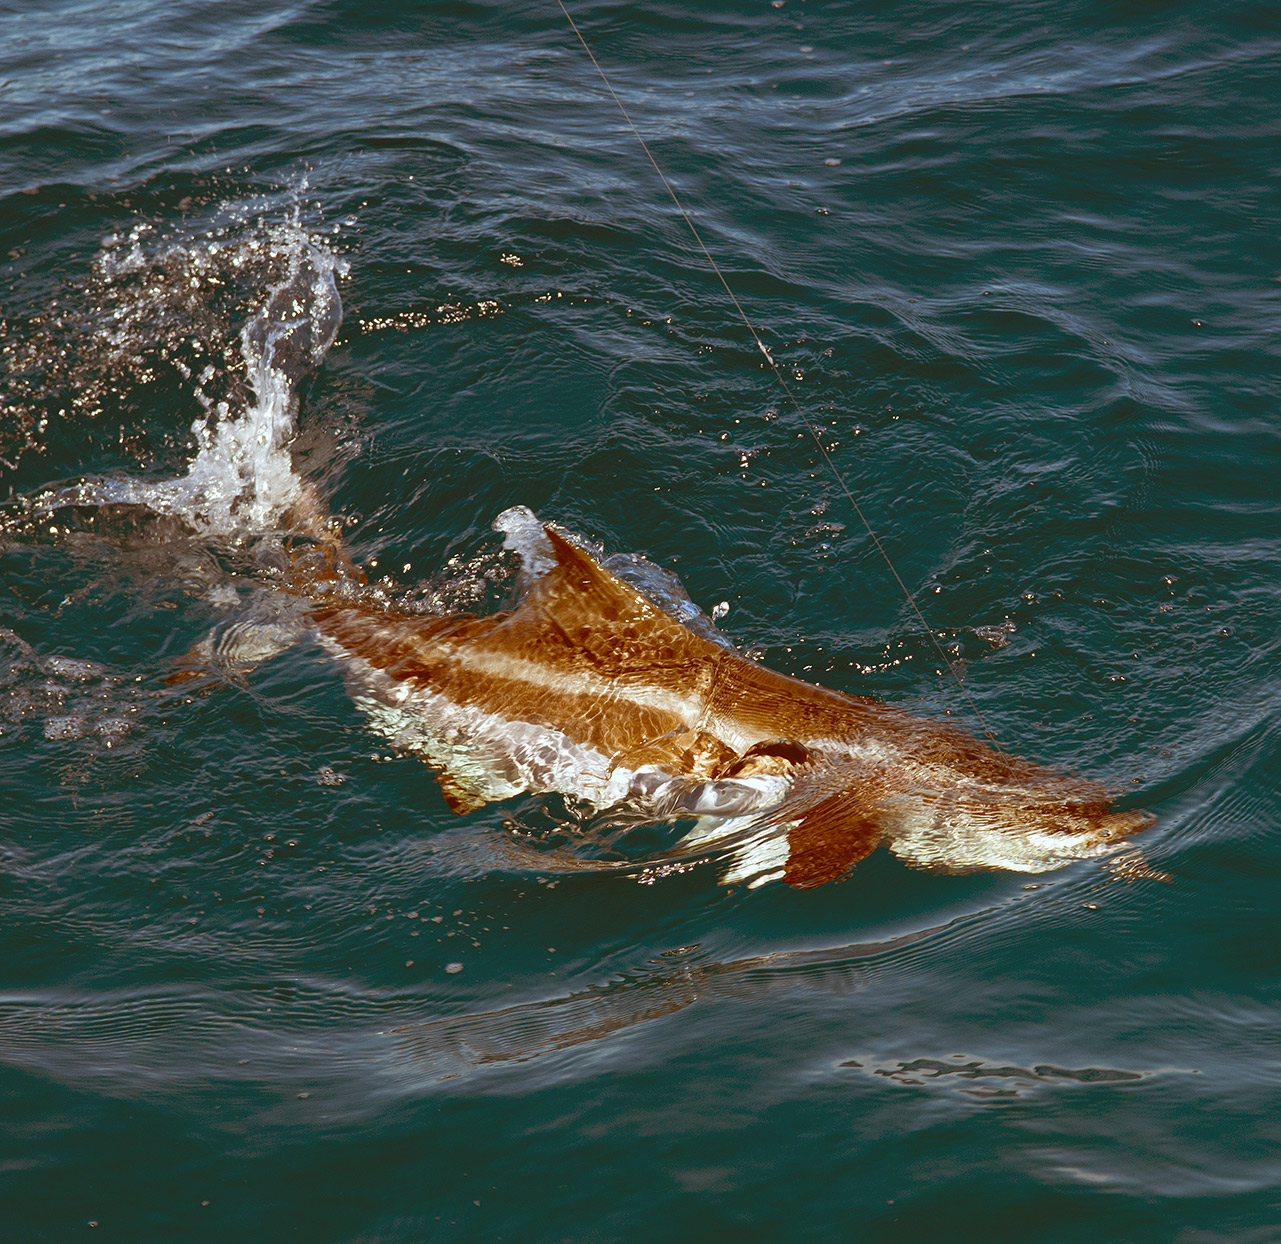 Cobia are an unpredictable species that can turn up without notice at any time around the Cape.